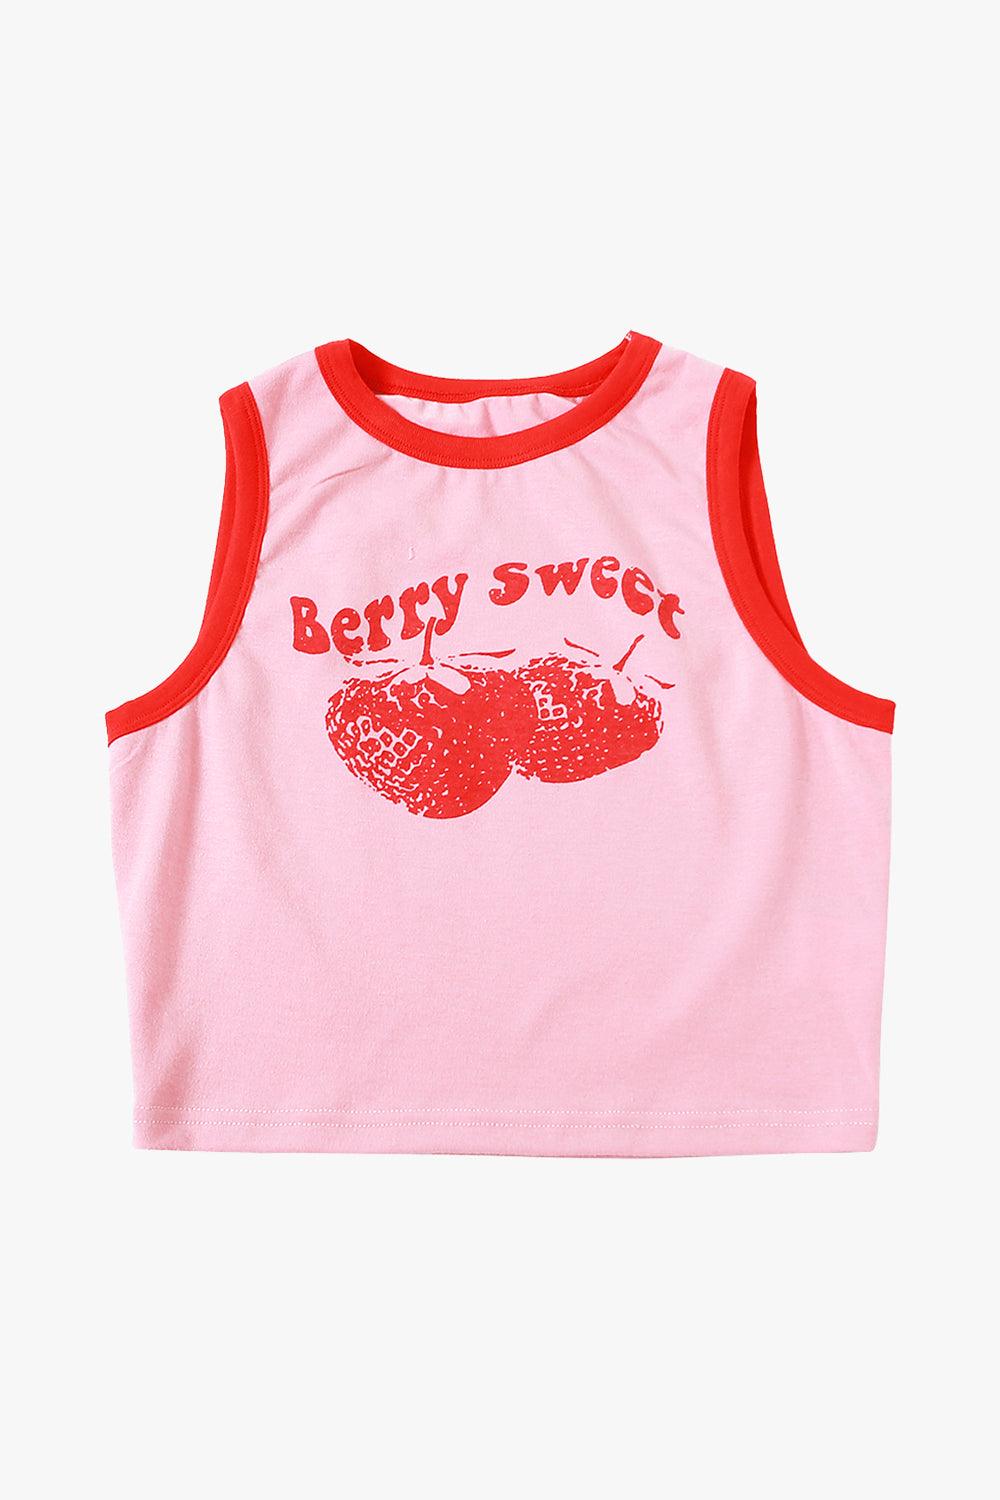 Berry Sweet Pink Tank Top - Aesthetic Clothes Shop